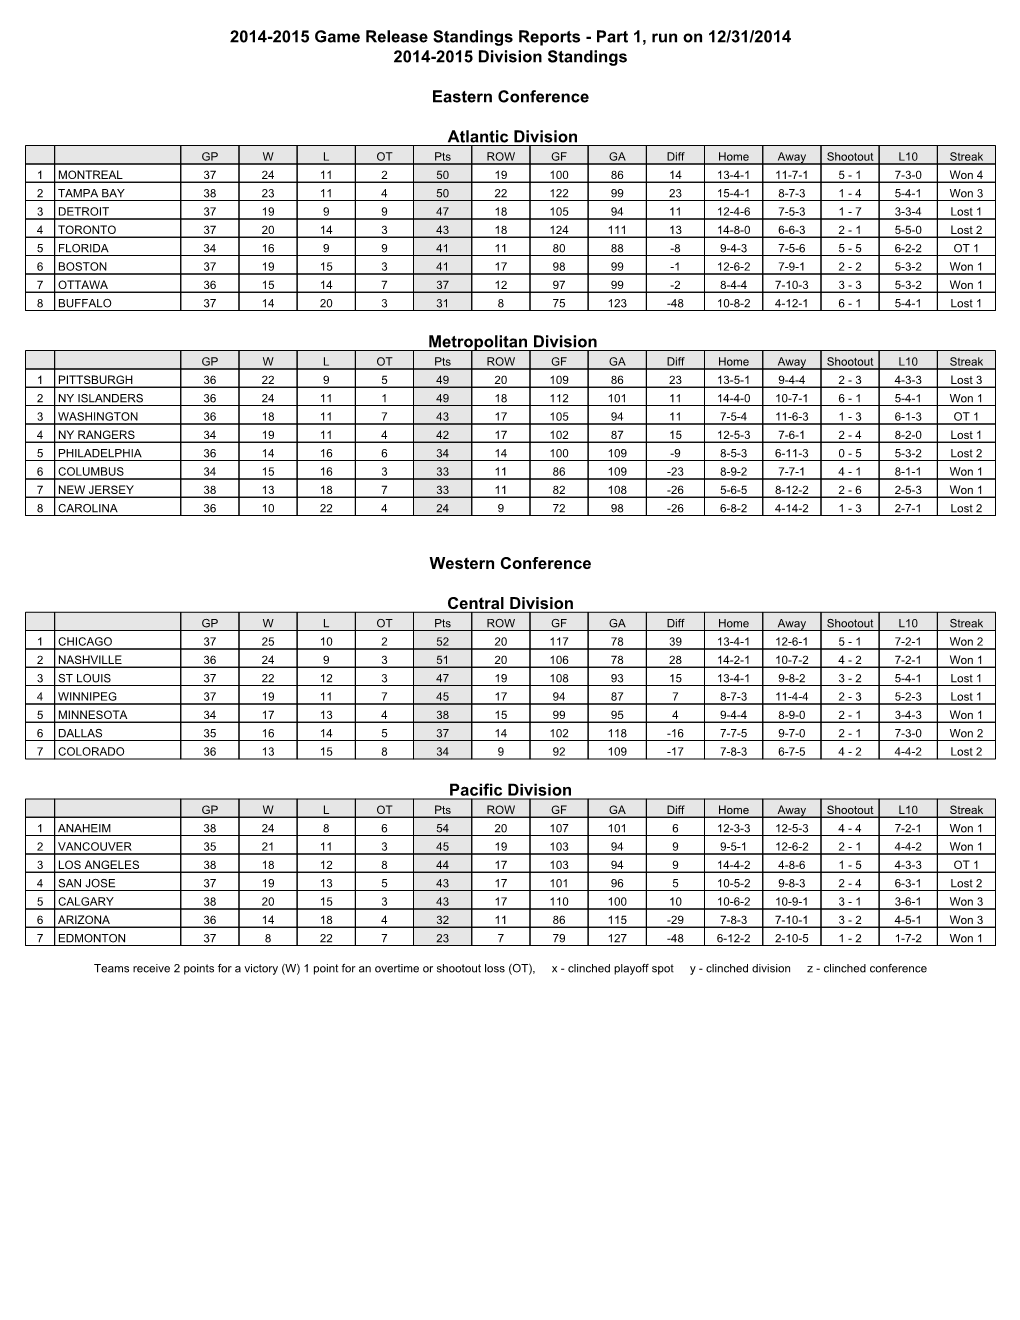 2014-2015 Game Release Standings Reports - Part 1, Run on 12/31/2014 2014-2015 Division Standings